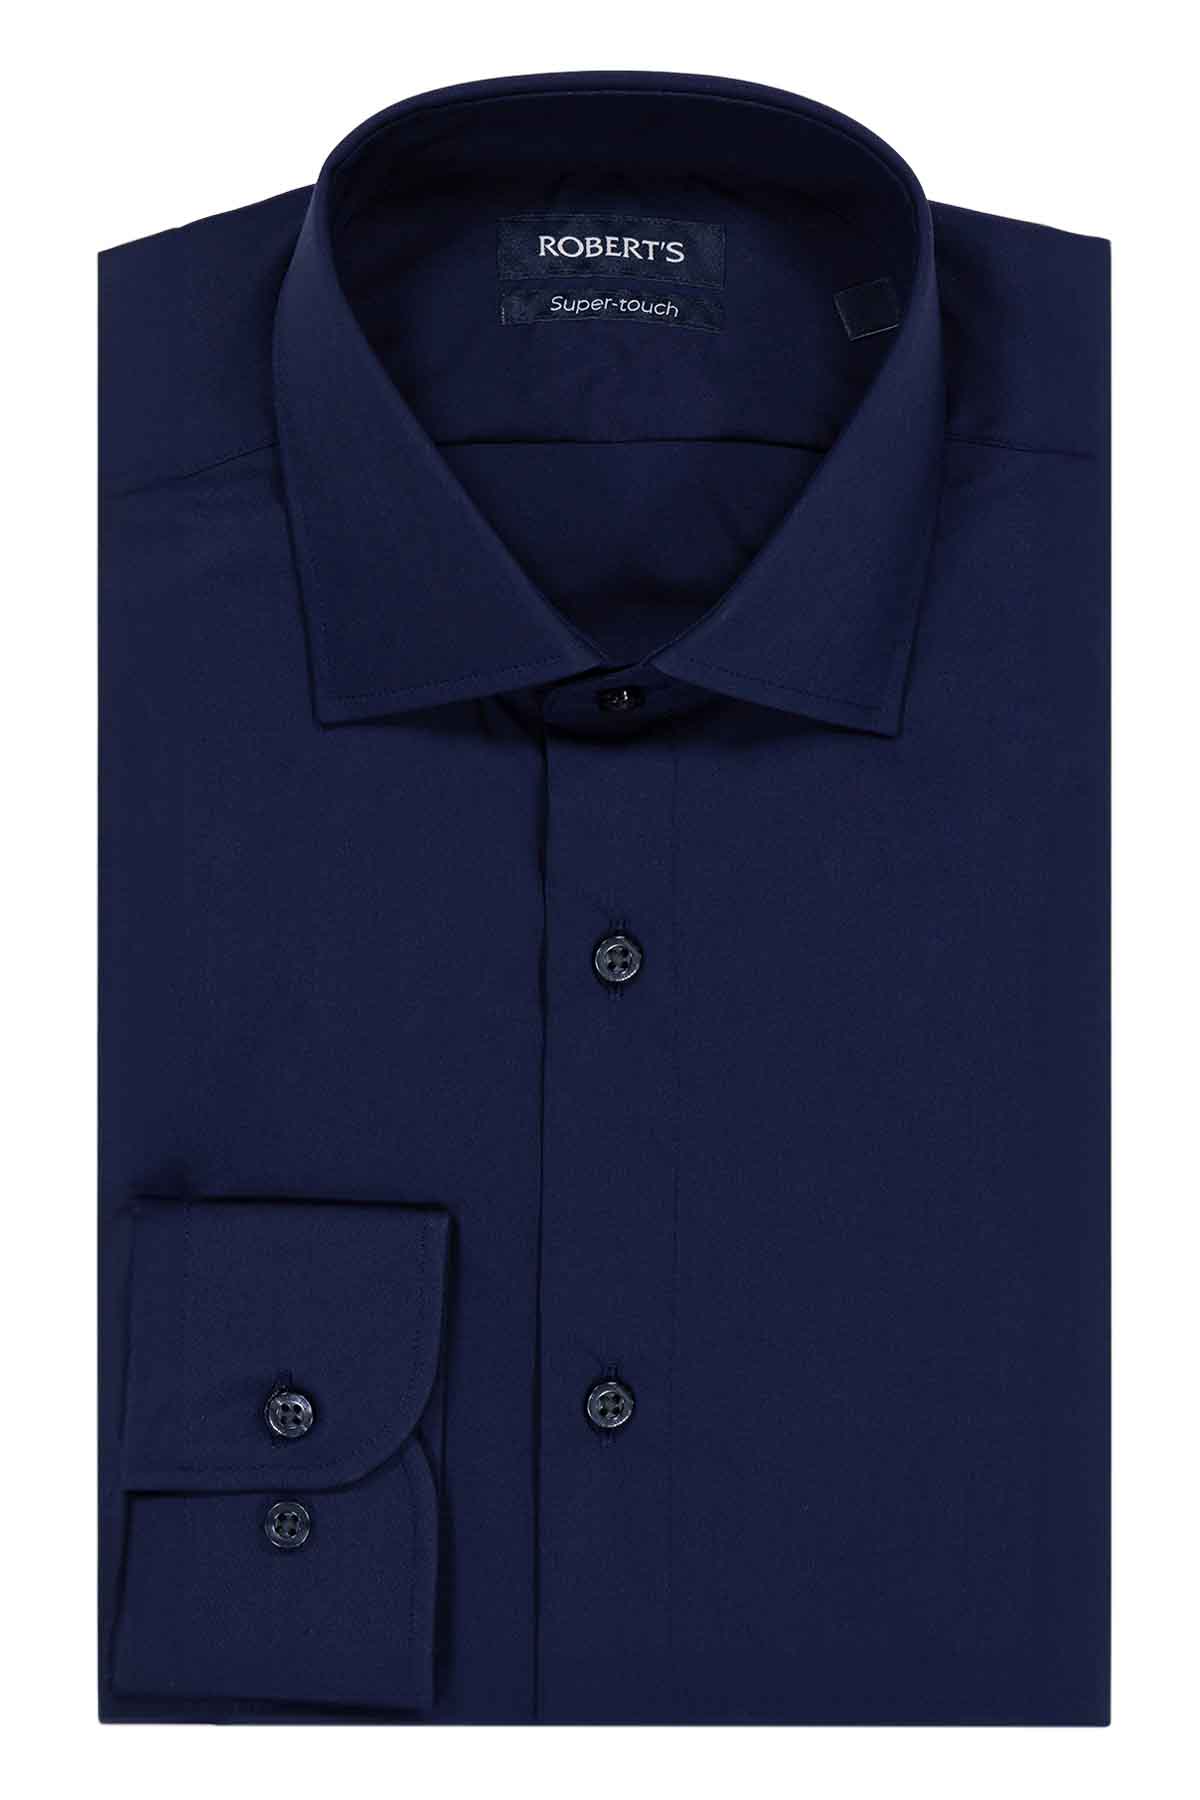 Camisa Sport Roberts Super Touch Color Azul Marino Slim Fit